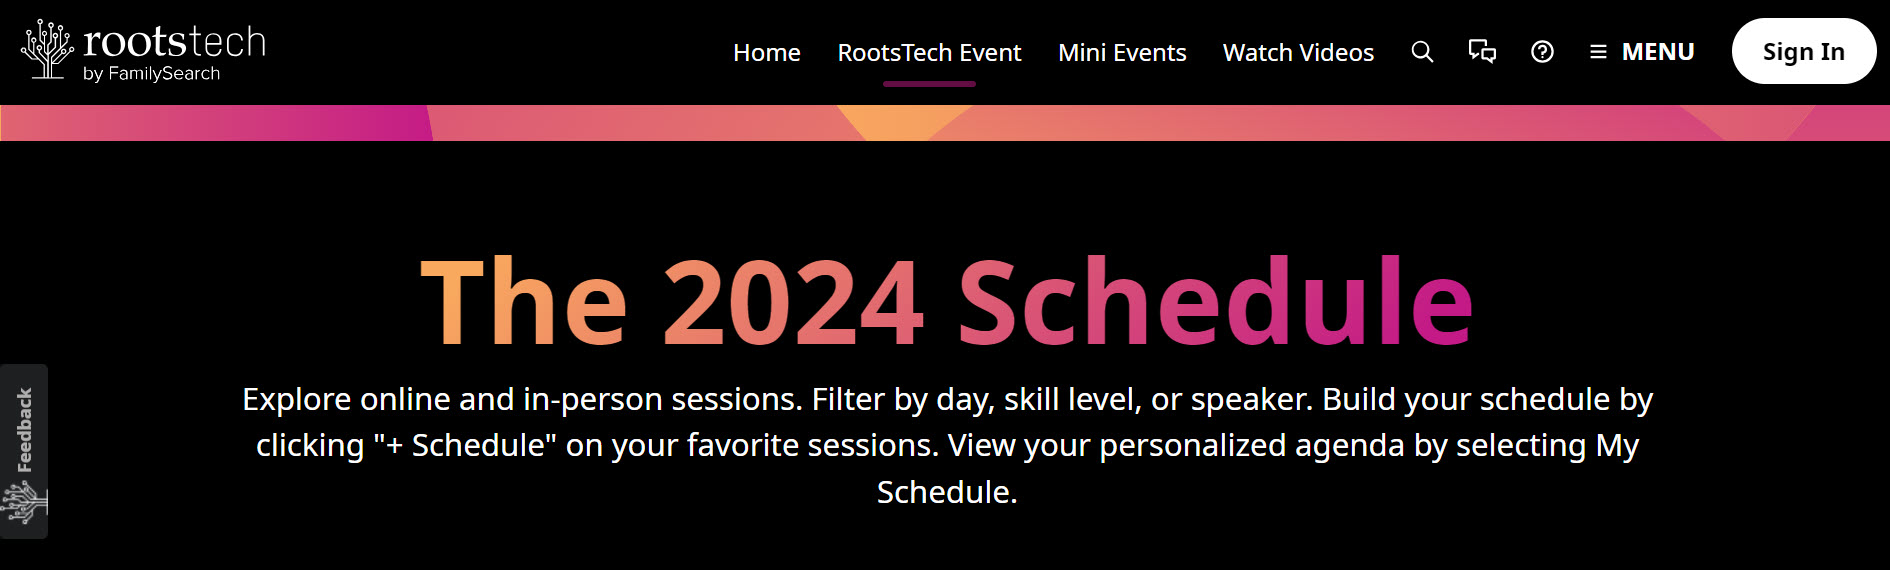 RootsTech 2024 Class Schedule NOW AVAILABLE! Genealogy Bargains